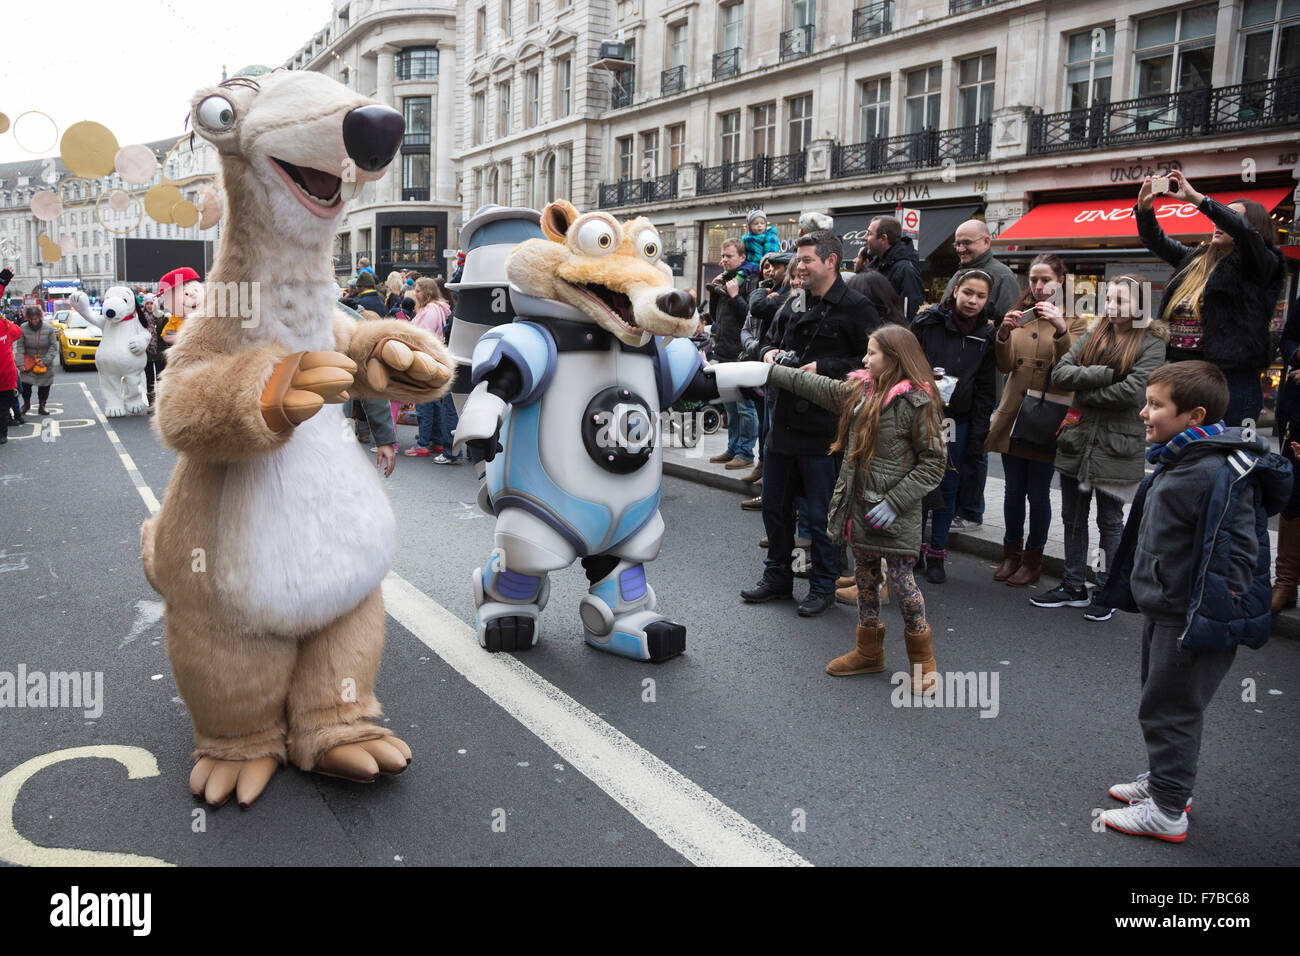 London, UK. 28 November 2015. Sid and Scrat from the Ice Age film interact with young fans. The inaugural Hamleys Christmas Toy Parade takes place along Regent Street, which went traffic-free for the day. The parade organised by the world-famous toy store Hamleys featured over 50 of the nation's favourite children's characters along with 400 entertainers, a marching band and giant balloons. The parade is modelled on Macy's annual Thanksgiving Parade in New York. Credit:  Vibrant Pictures/Alamy Live News Stock Photo